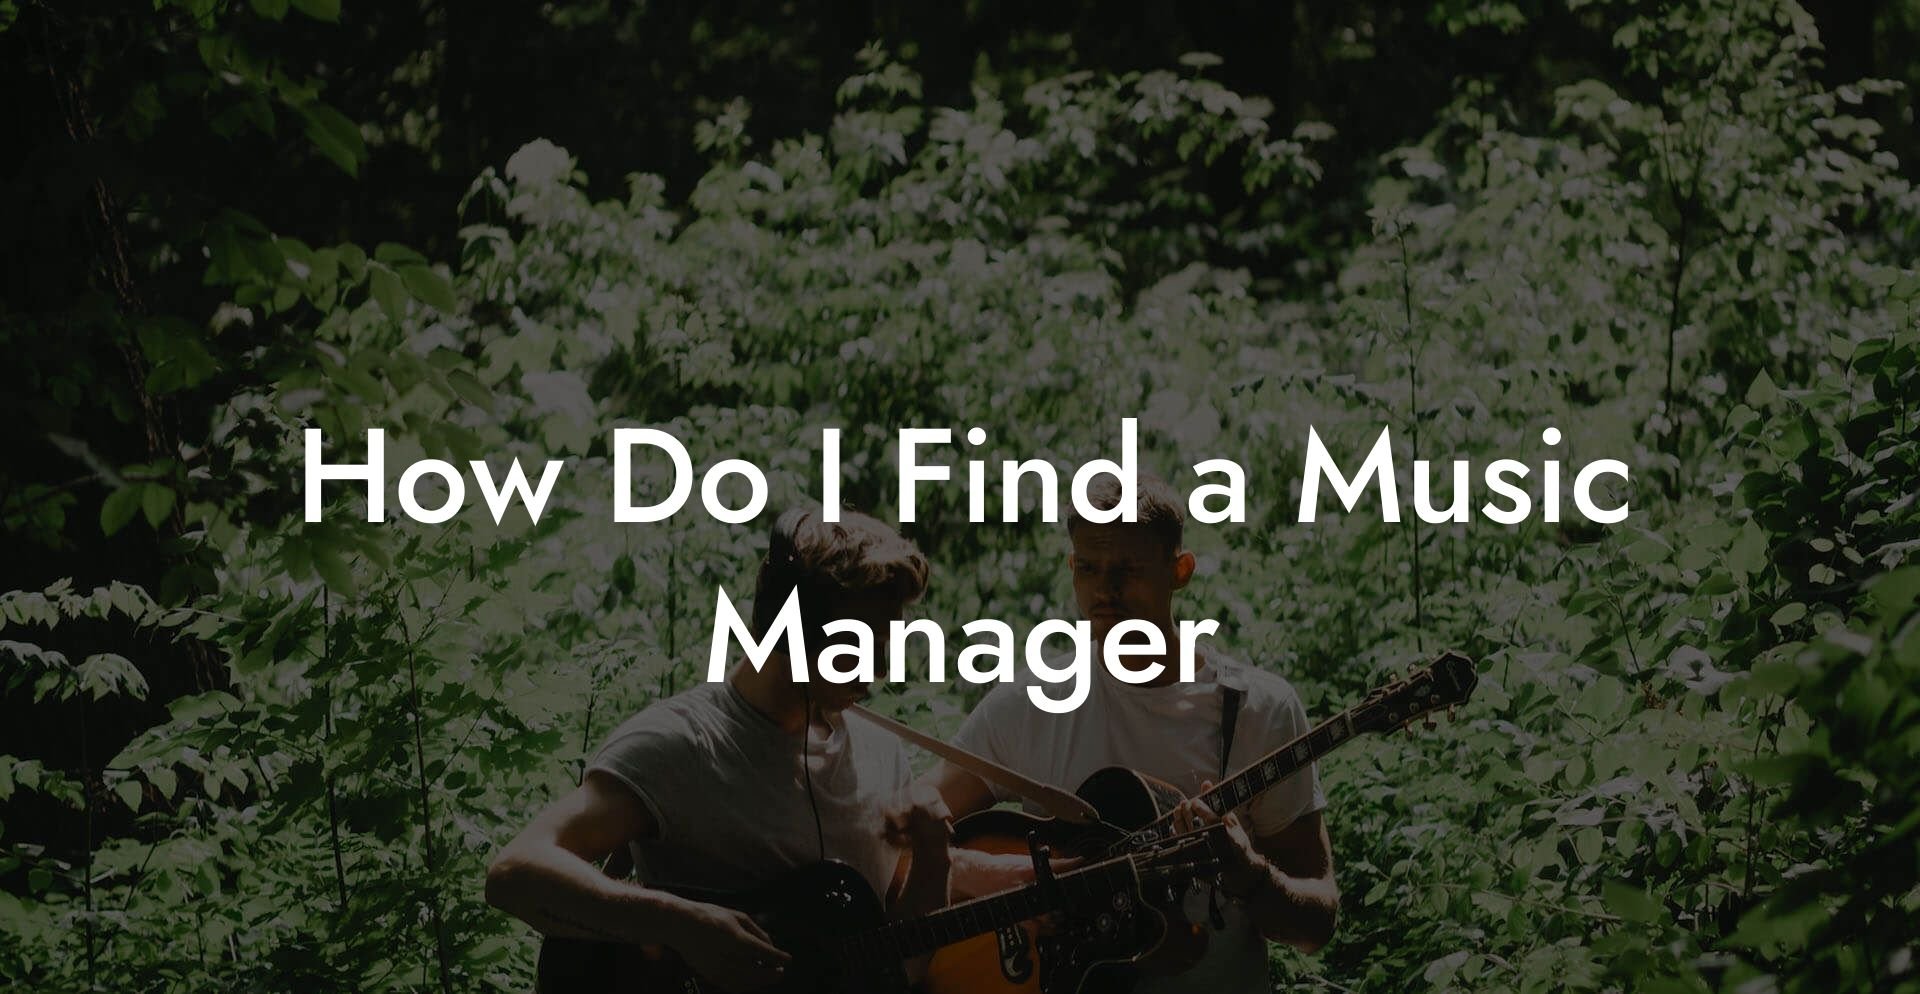 How Do I Find a Music Manager